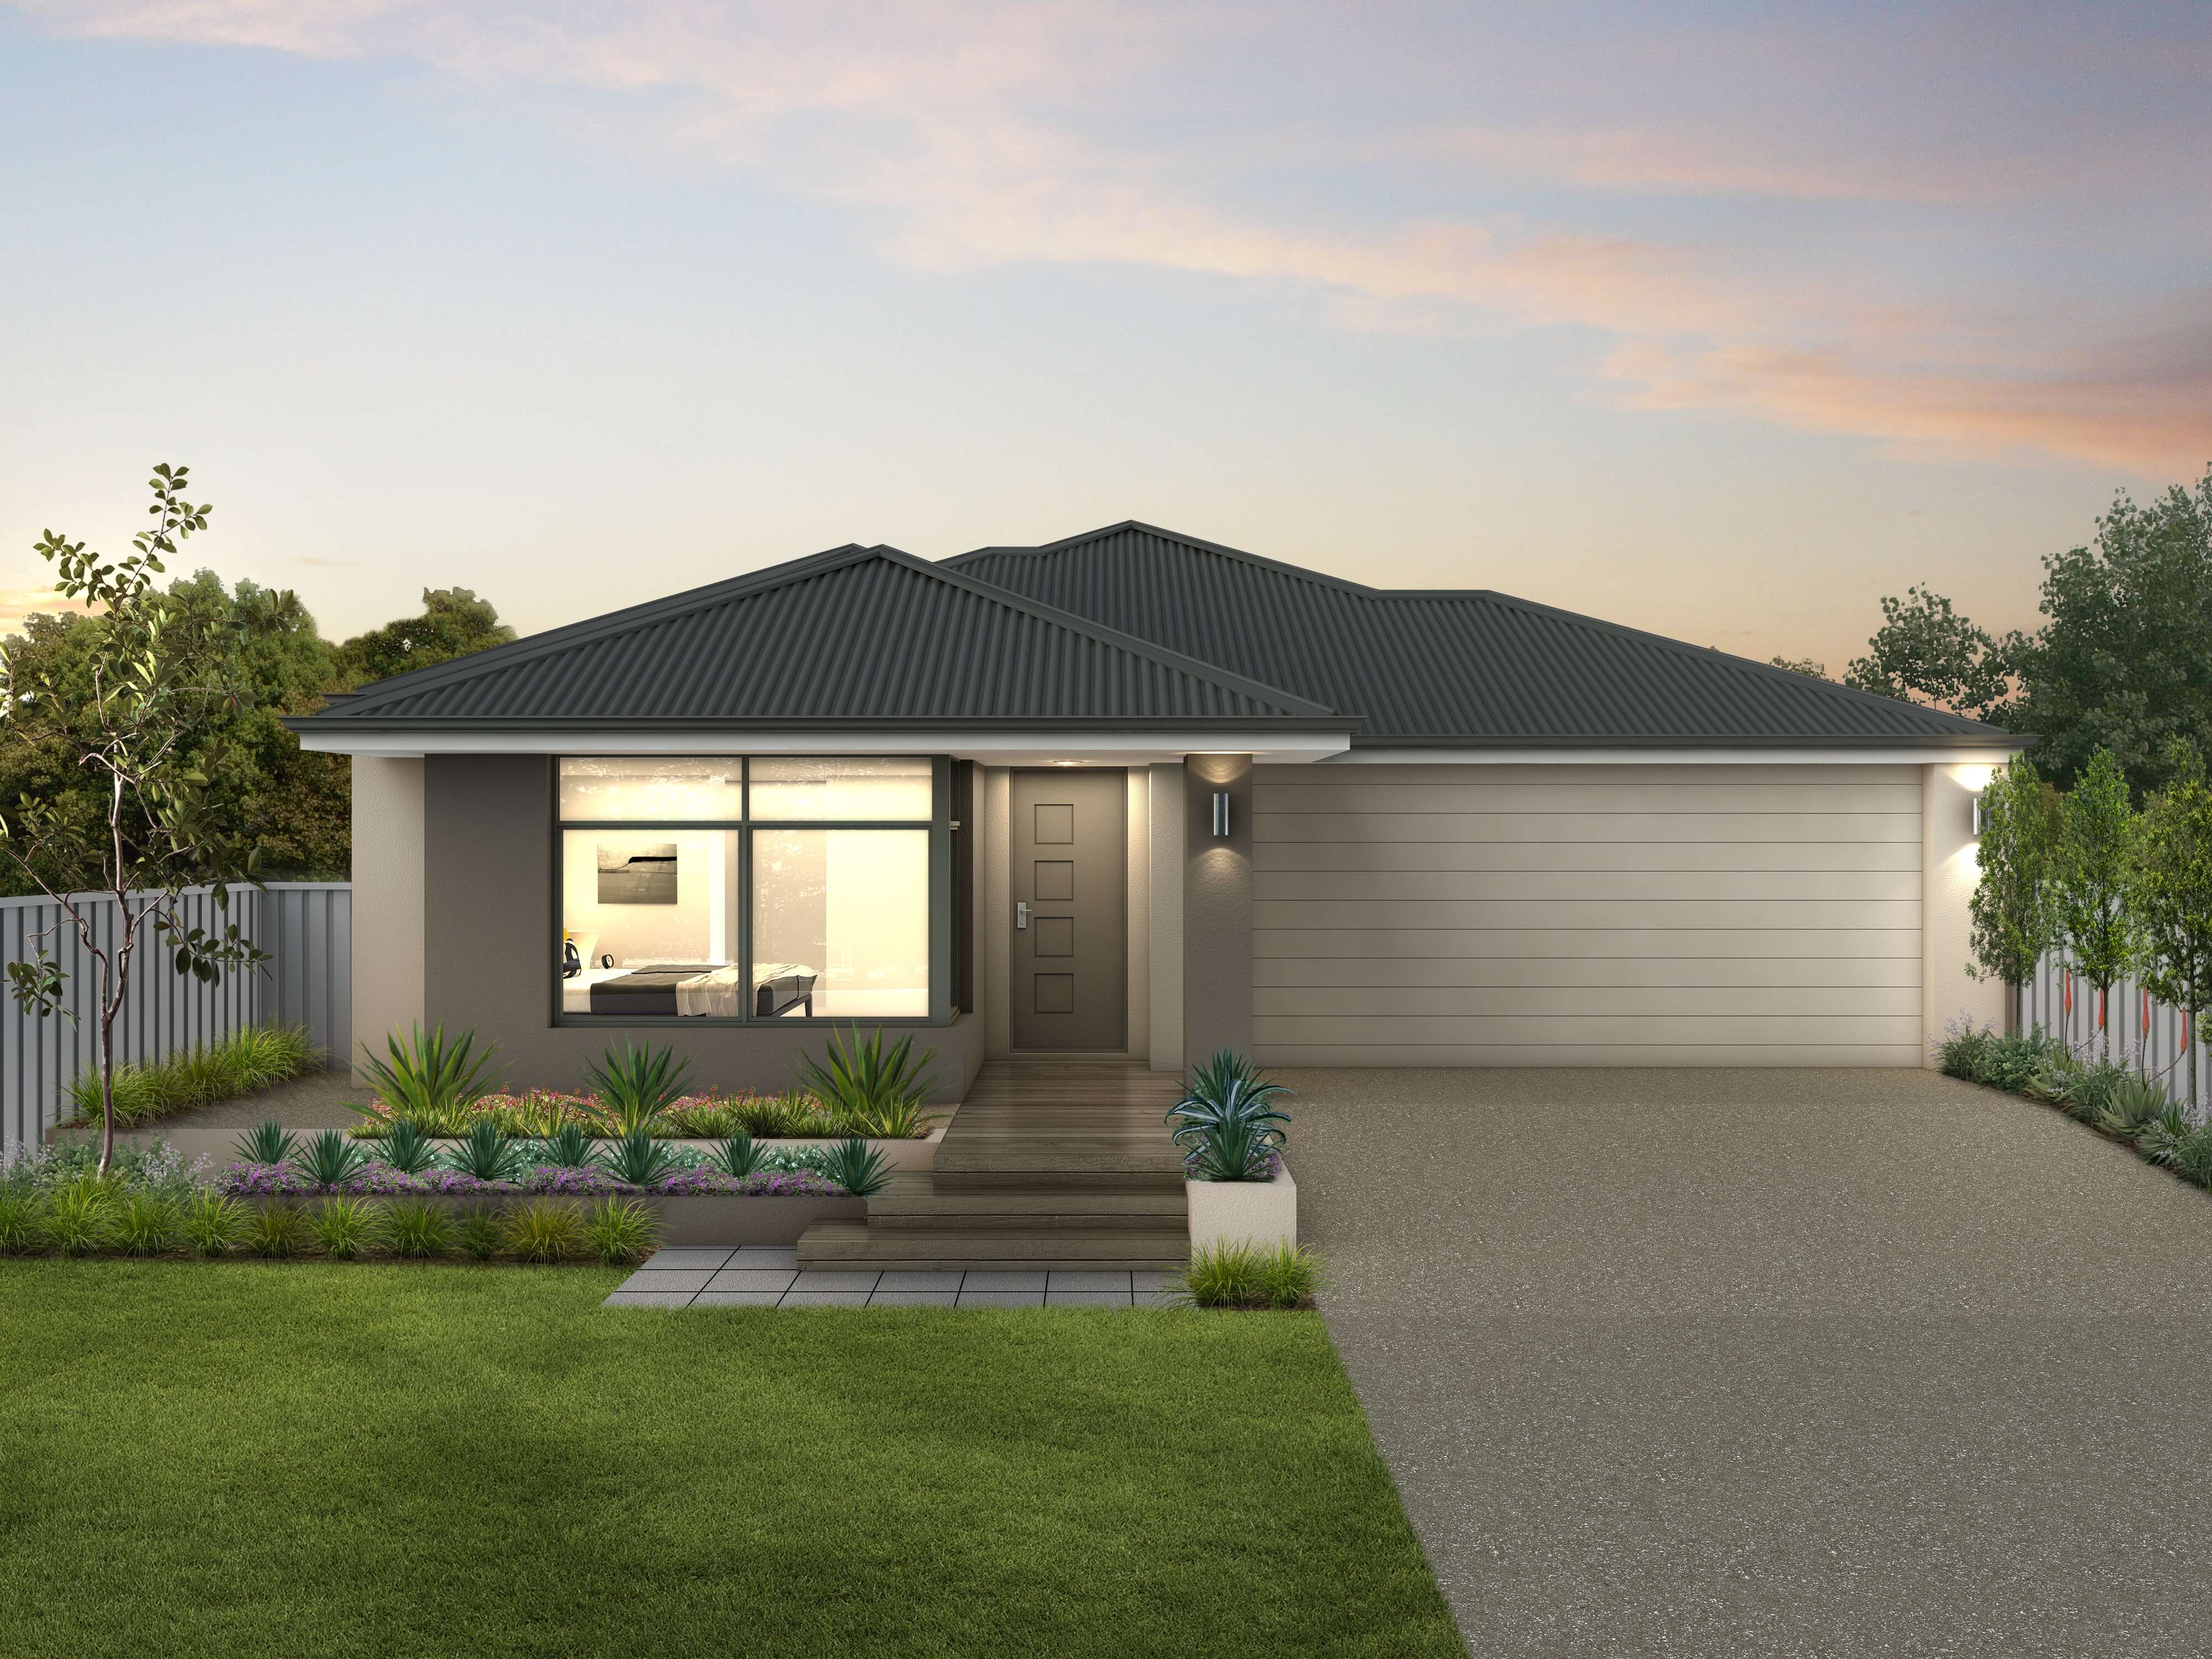 The Cambridge, a new home design by Move Homes for Perth families and first time home buyers